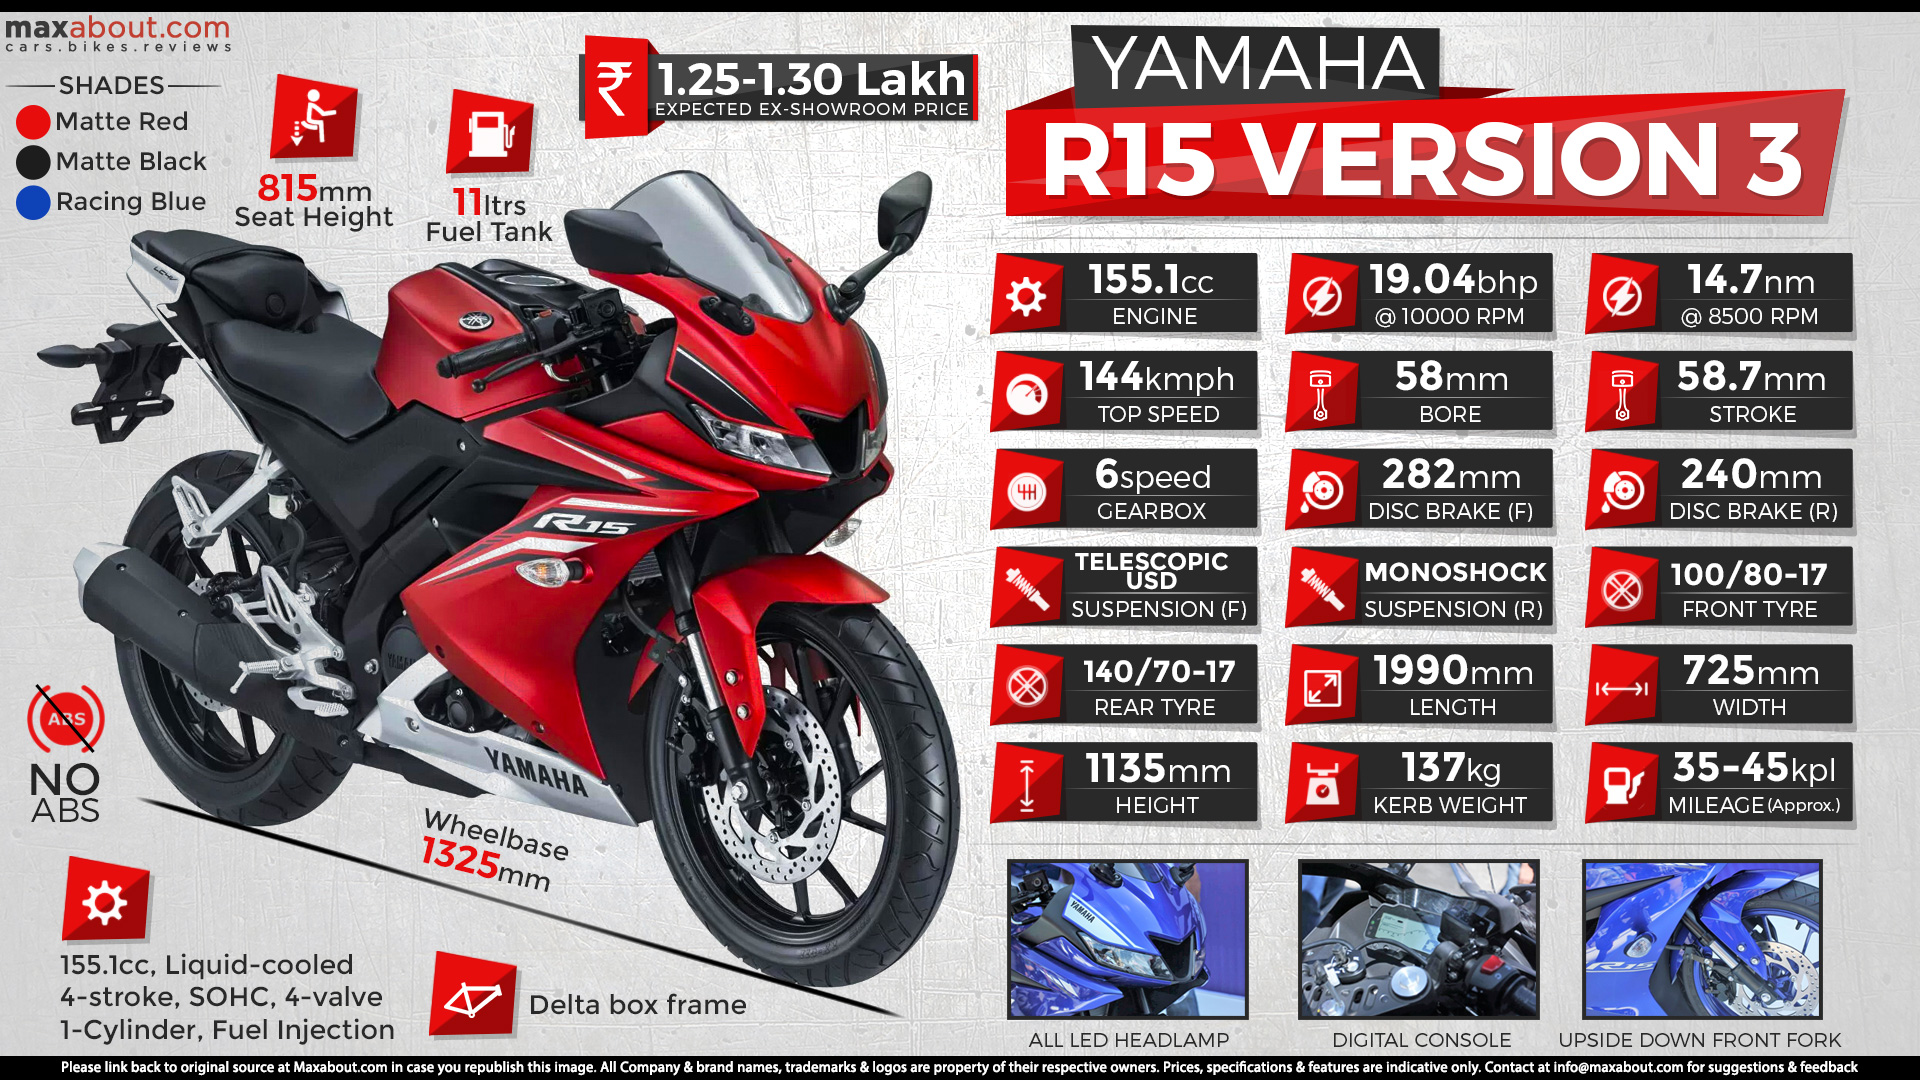 Fast Facts About Yamaha R15 Version